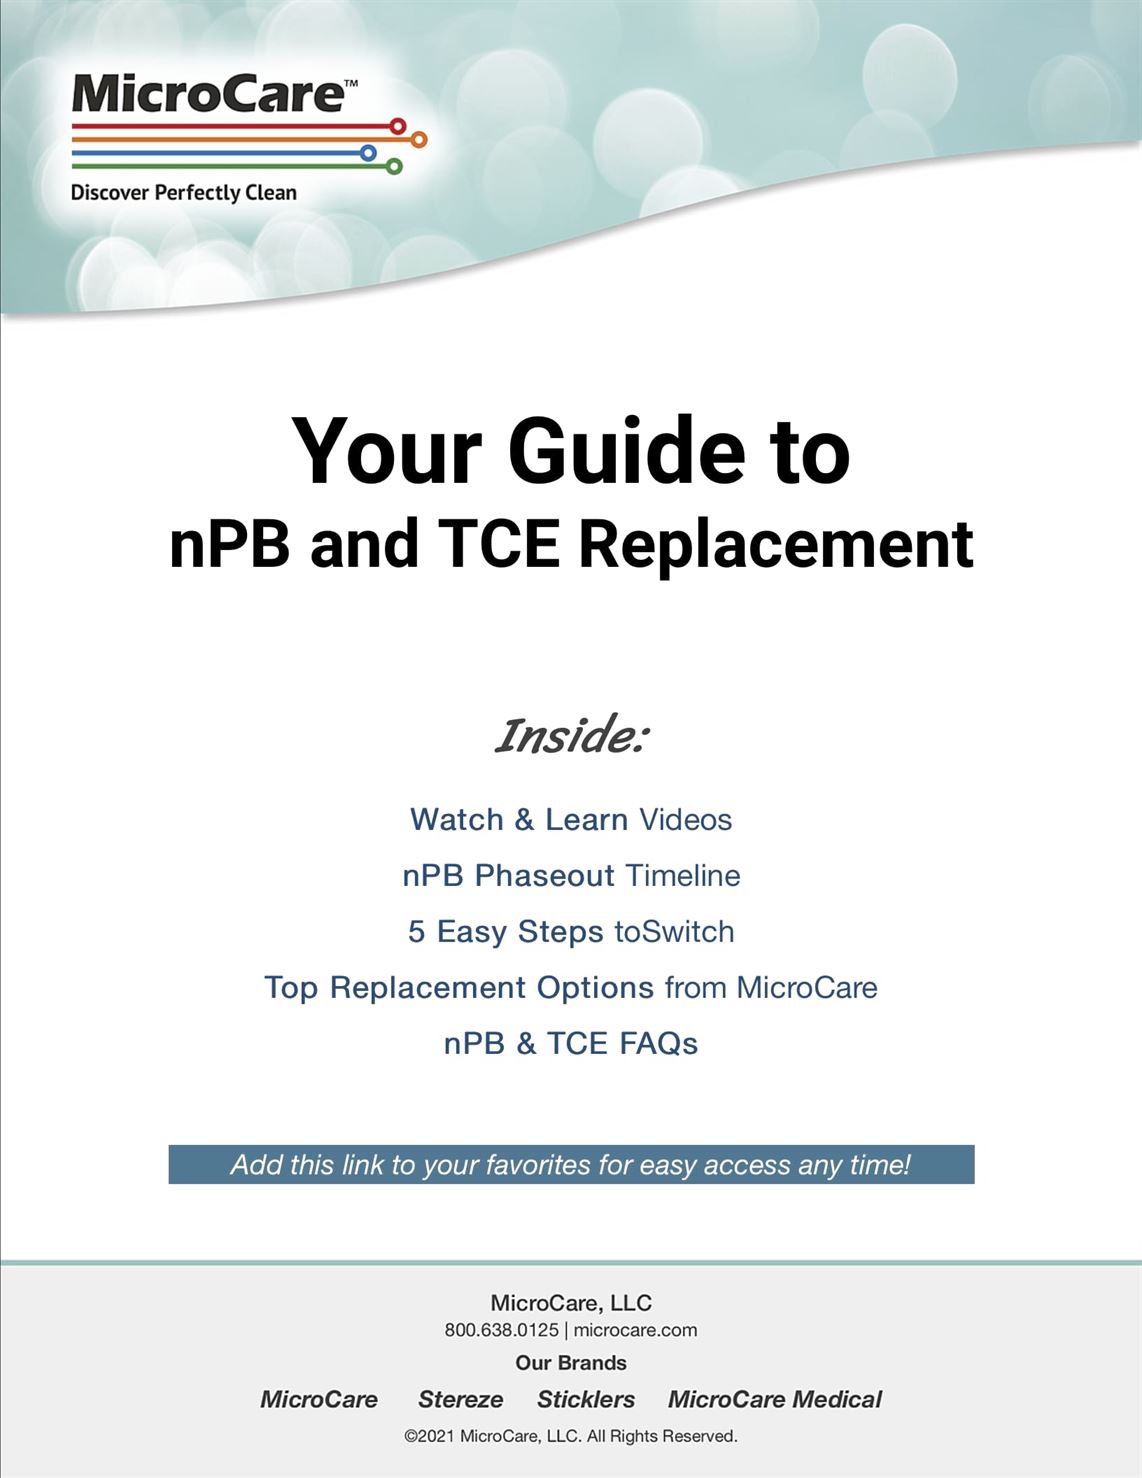 Your Guide to nPB and TCE Replacements